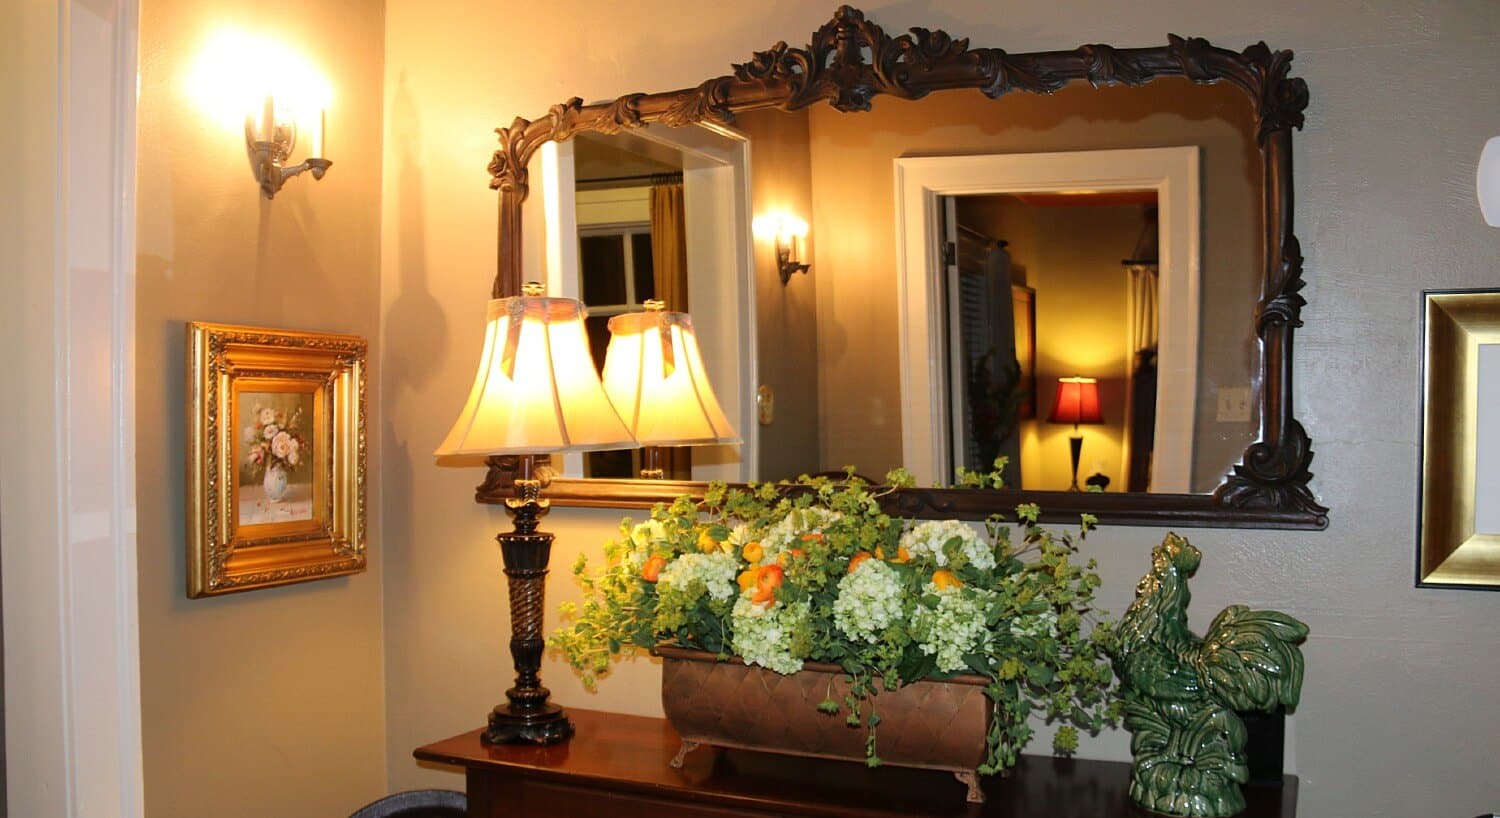 Dark wood entryway table with lamp, large ornate mirror, and decorative flowers